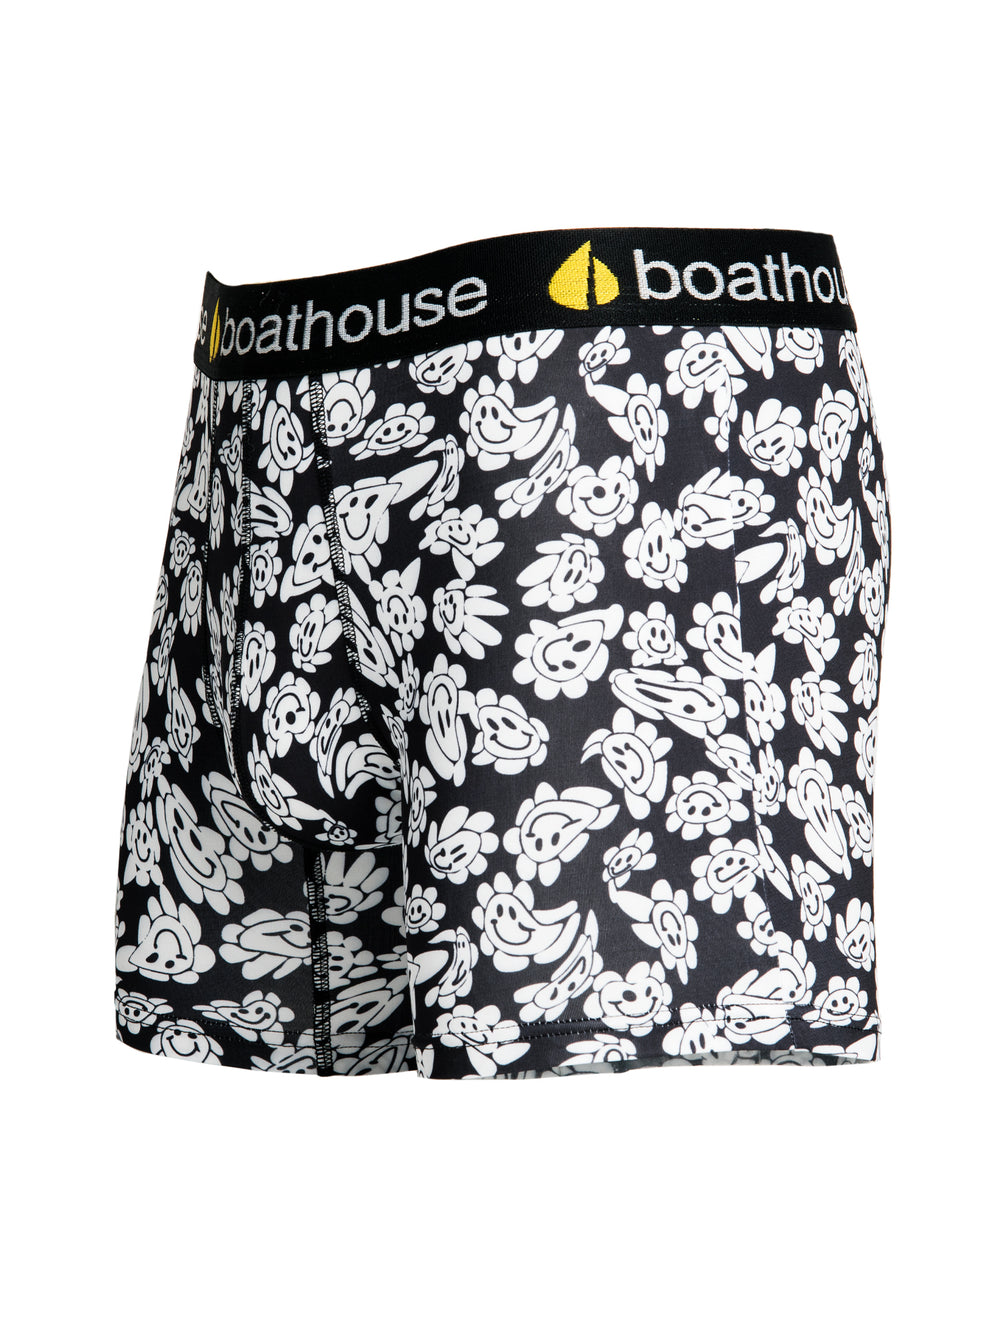 NOVELTY BOXER BRIEF - SMILEY FLOWERS - CLEARANCE